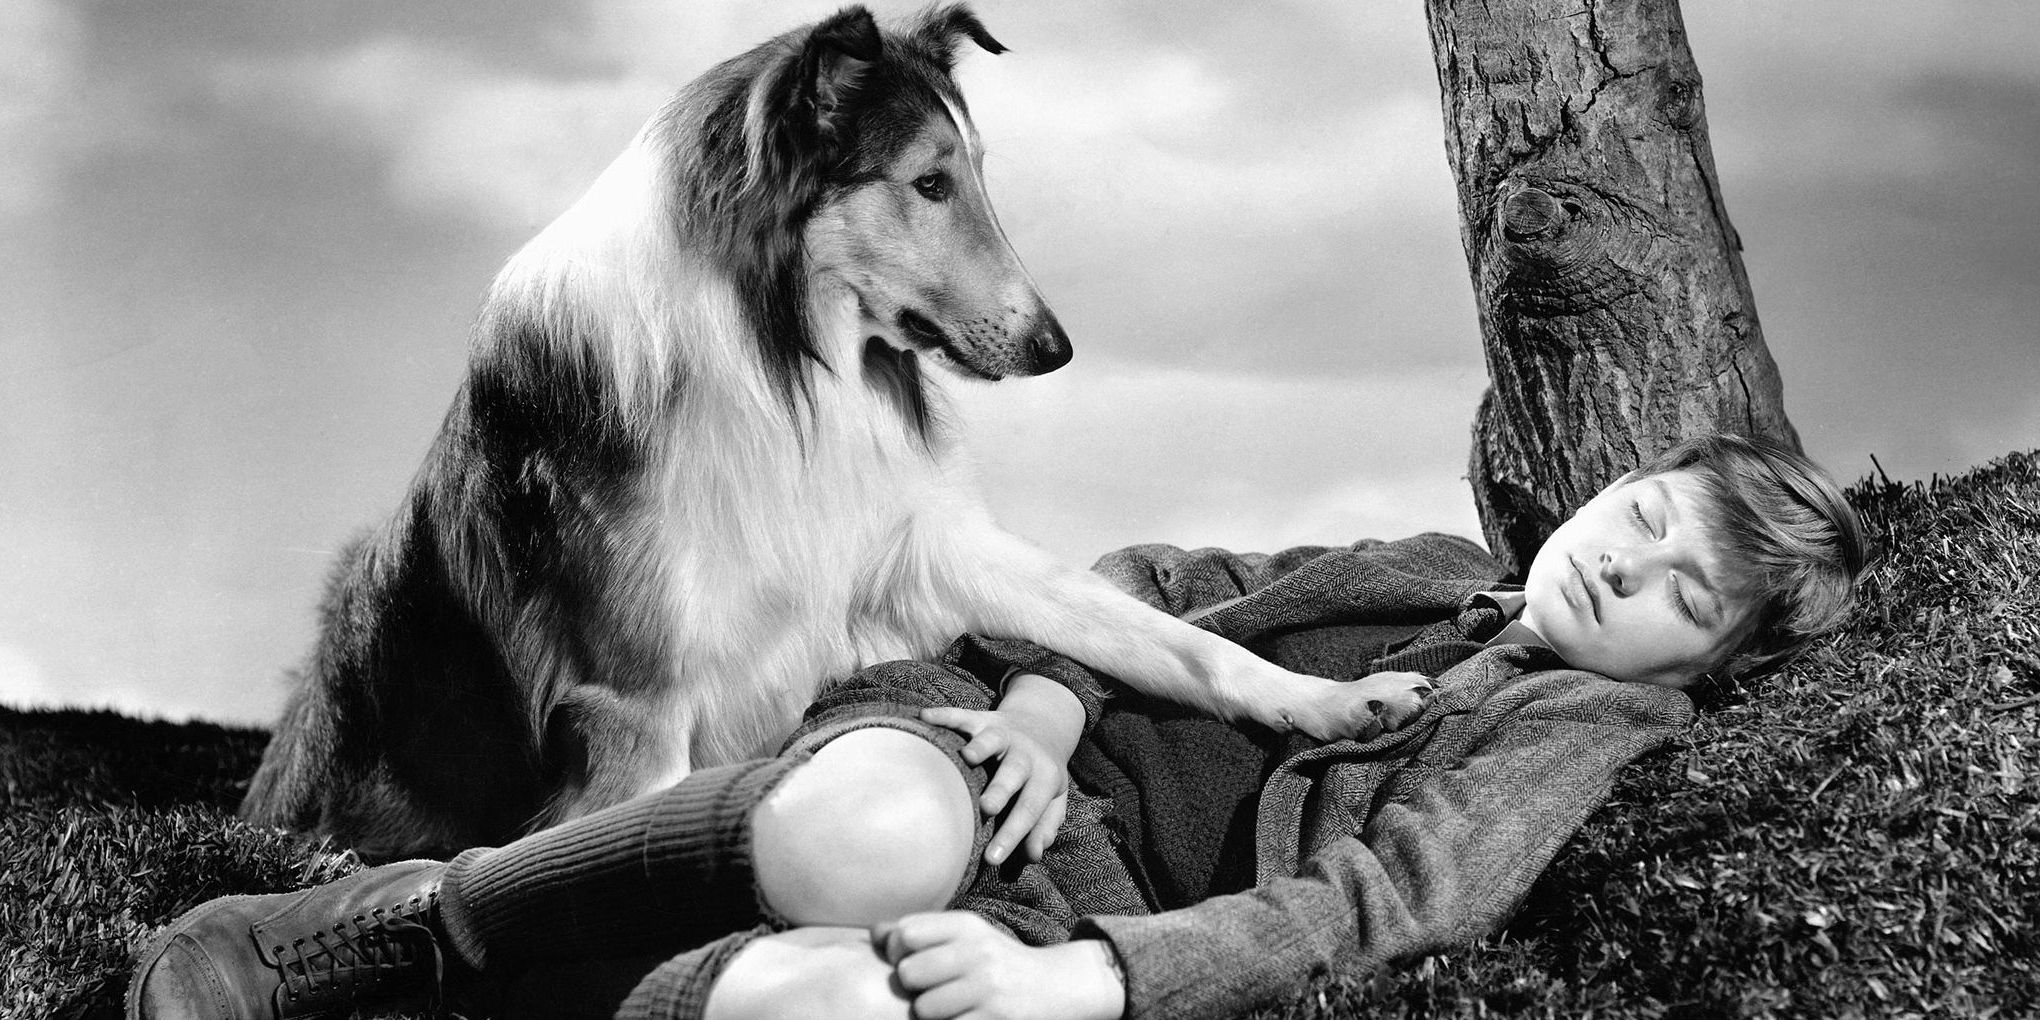 Lassie puts her paw on Timmy in Lassie Come Home